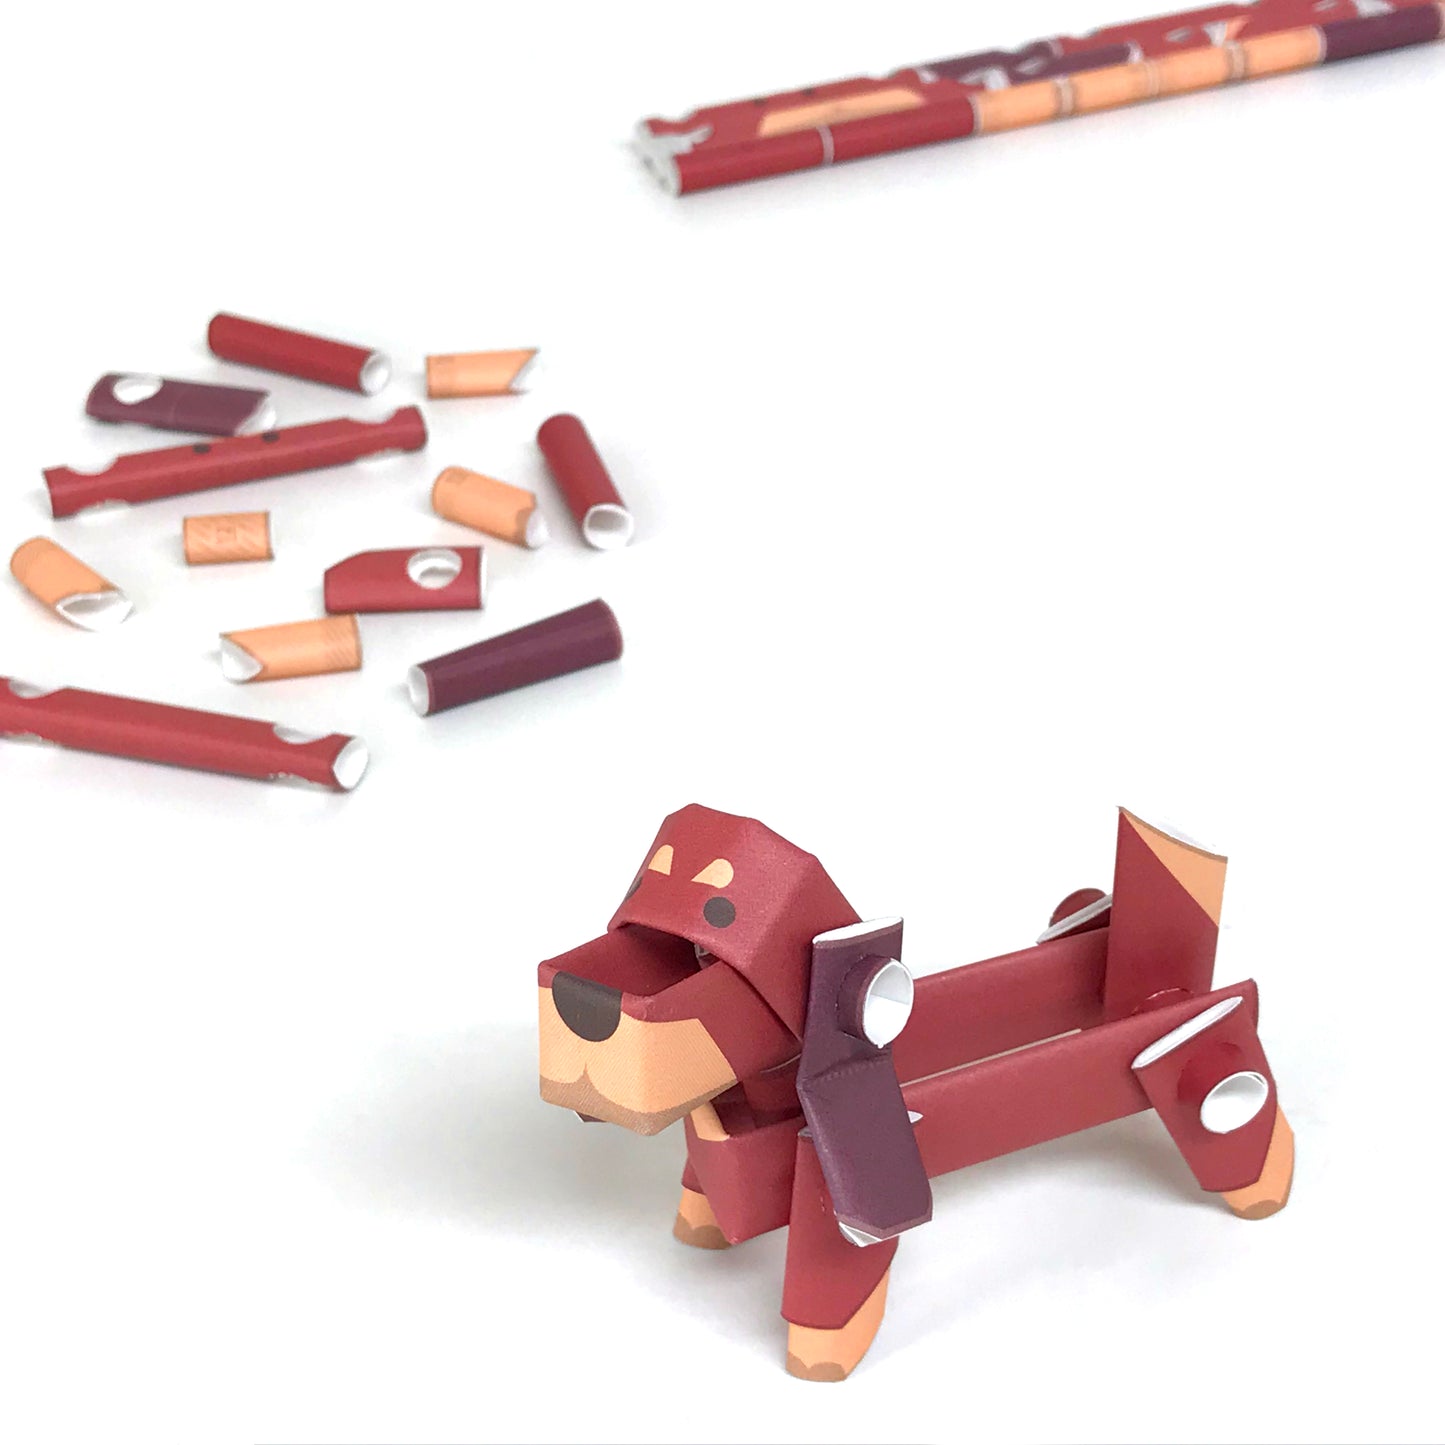 Parts and compoents and finished product of Make your own dachshund from Piperoid